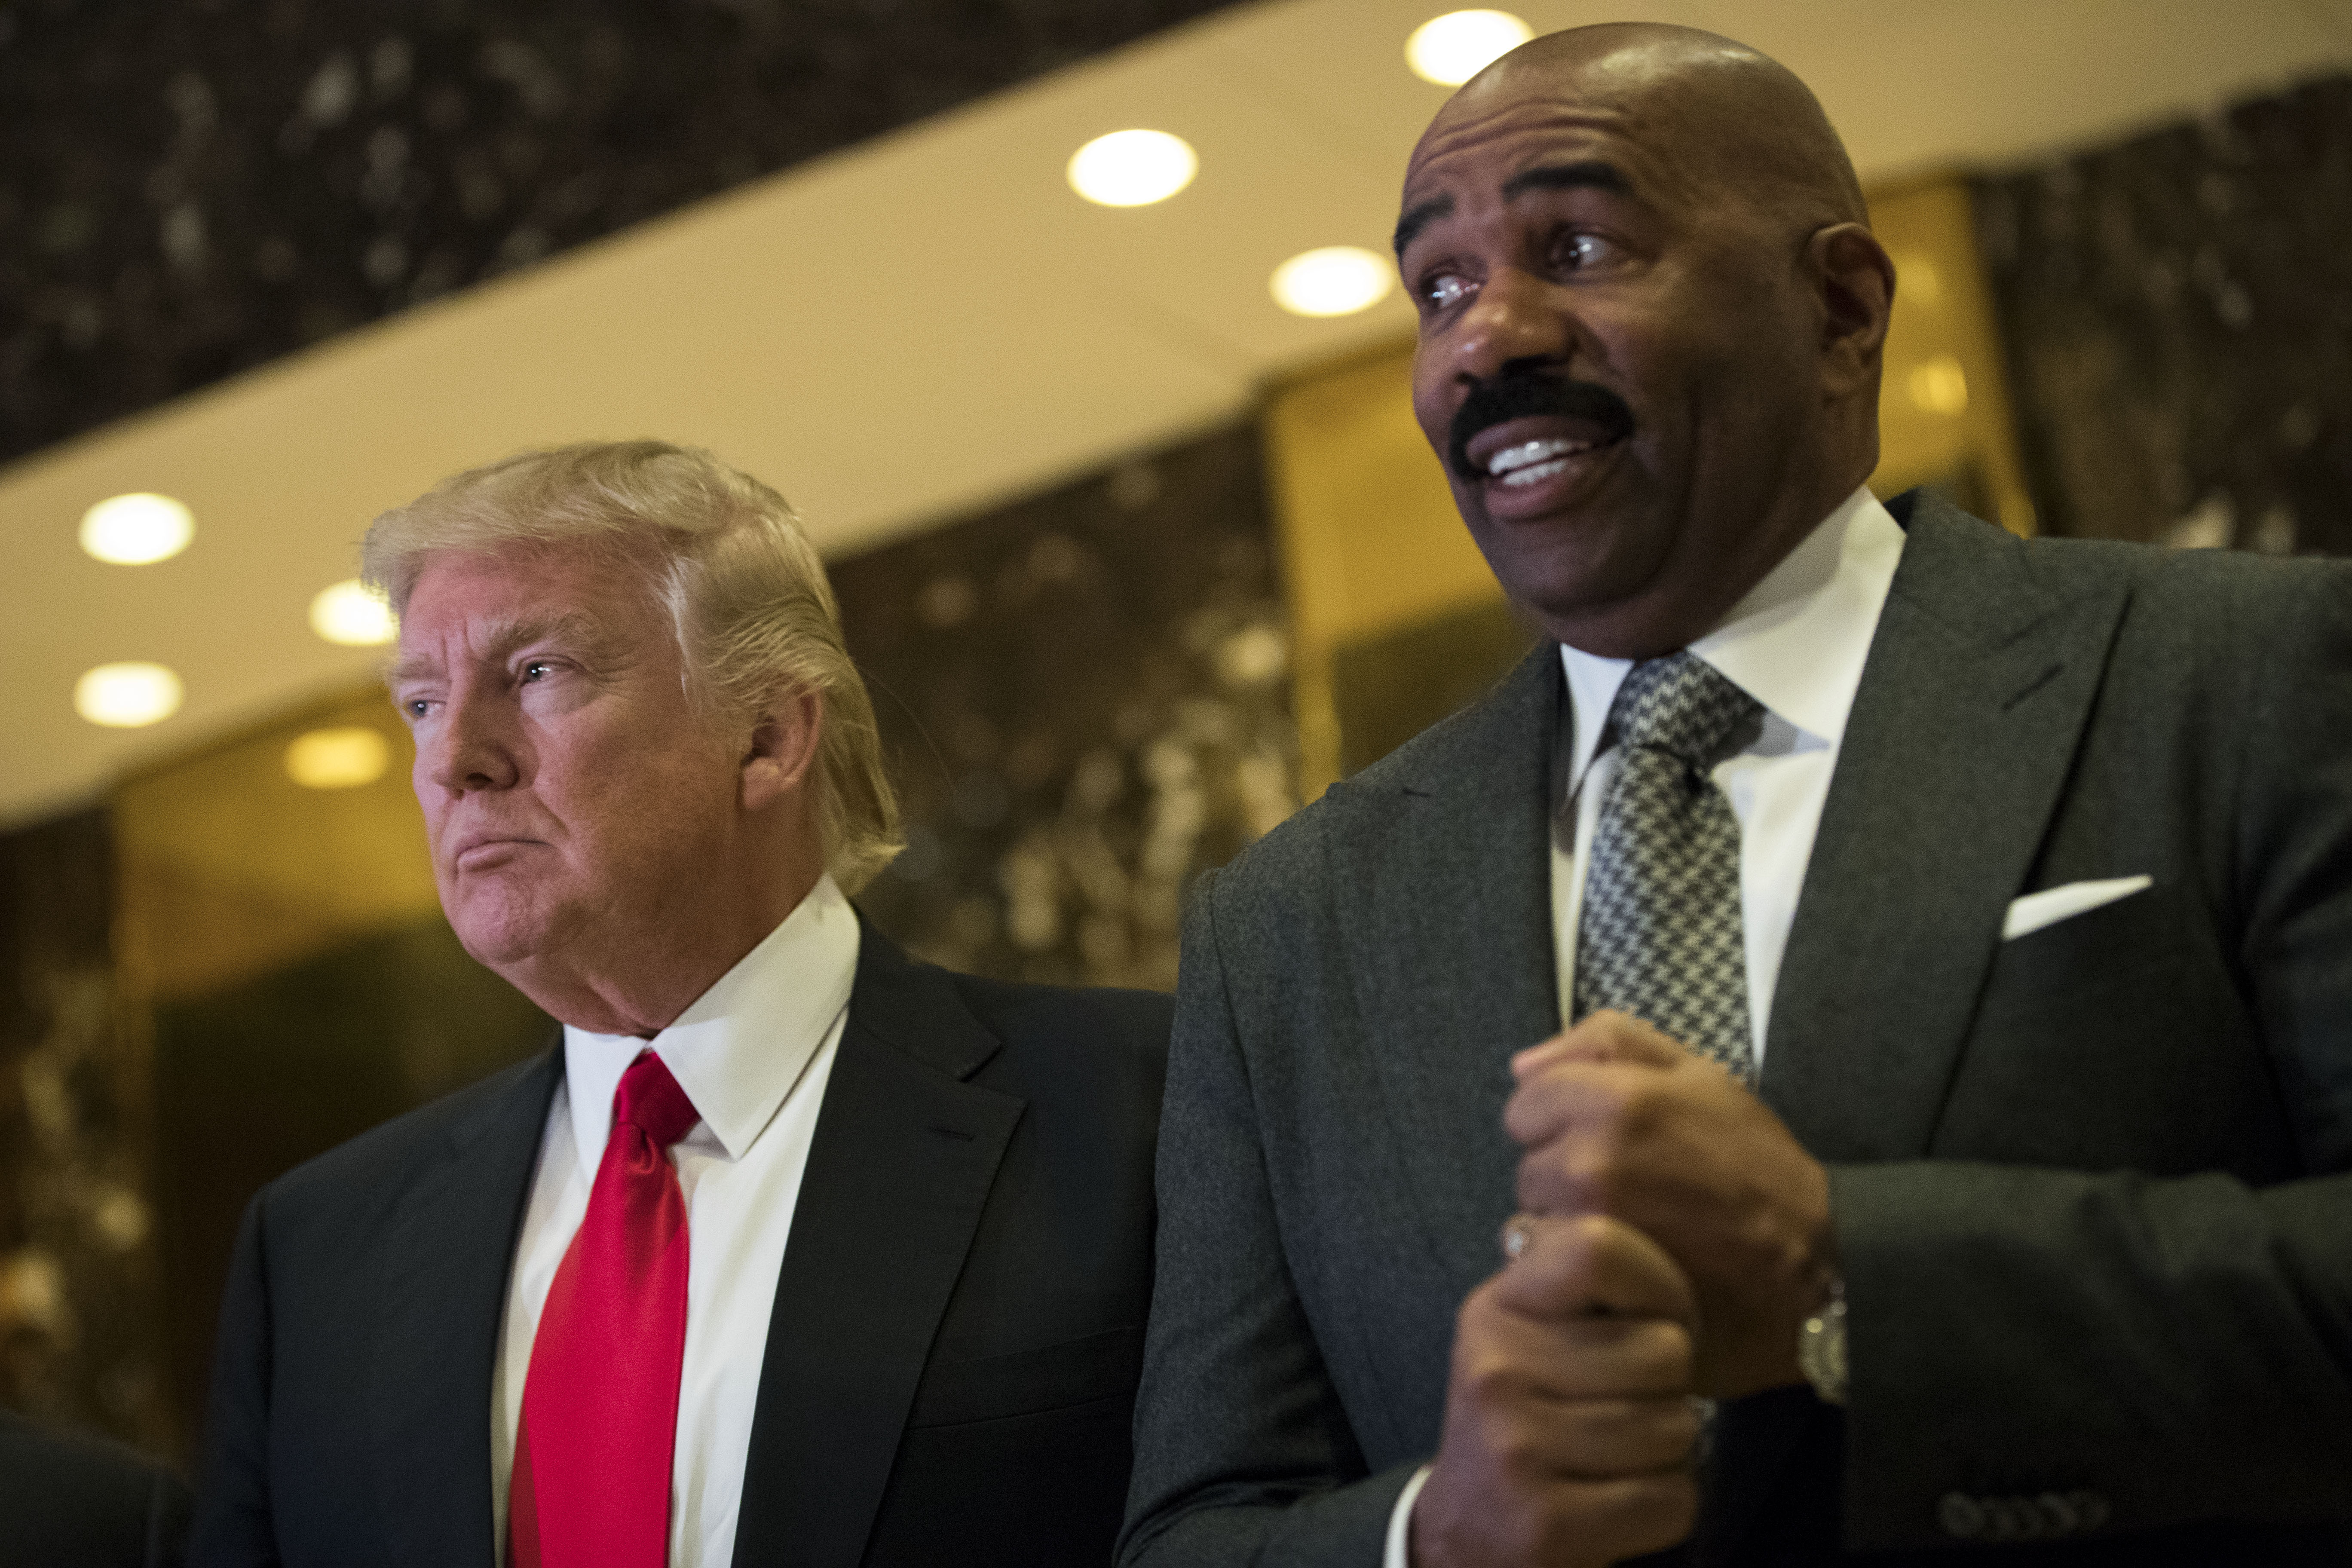 President-elect Donald Trump and television personality Steve Harvey speak to reporters after their meeting at Trump Tower, January 13, 2017 in New York City. President-elect Trump continues to hold meetings at Trump Tower in New York. (Photo by Drew Angerer/Getty Images)